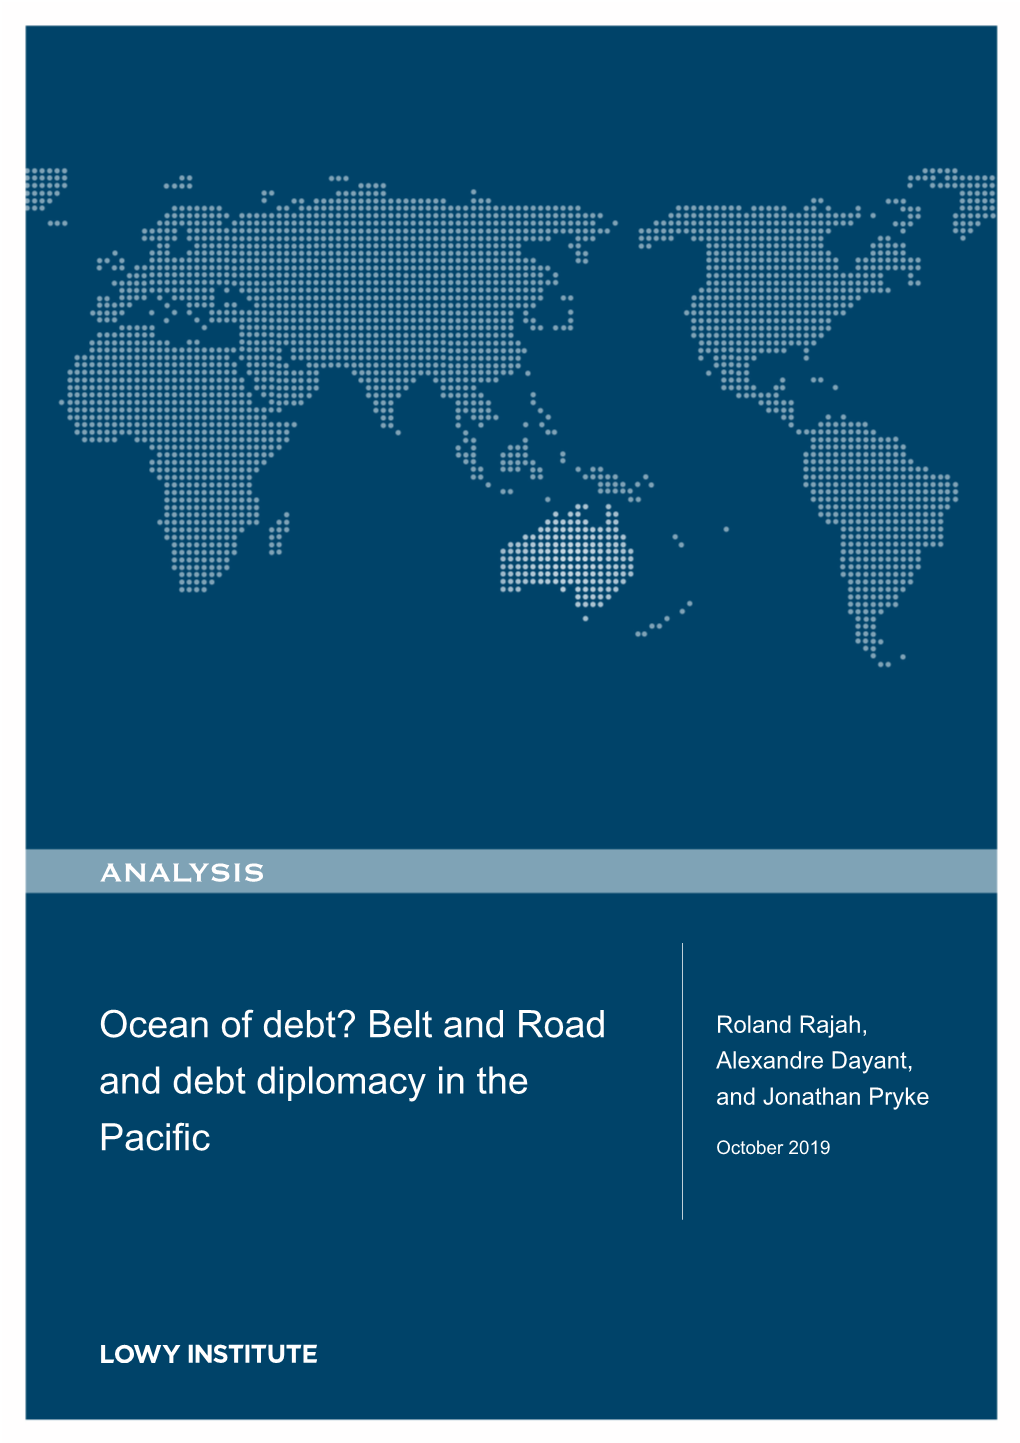 Ocean of Debt? Belt and Road and Debt Diplomacy in the Pacific